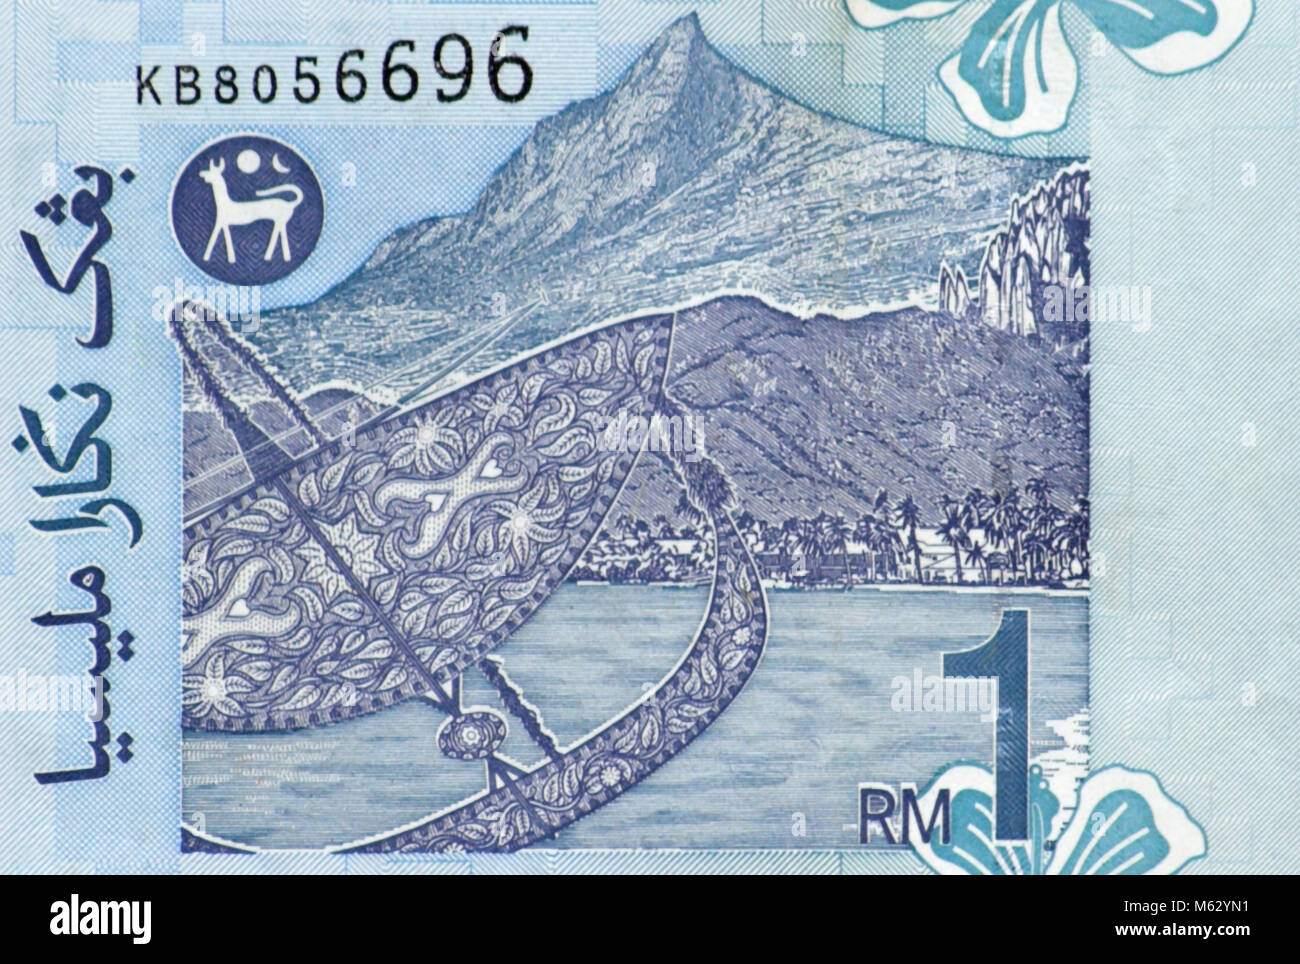 Malaysia One 1 Ringgit Bank Note Stock Photo